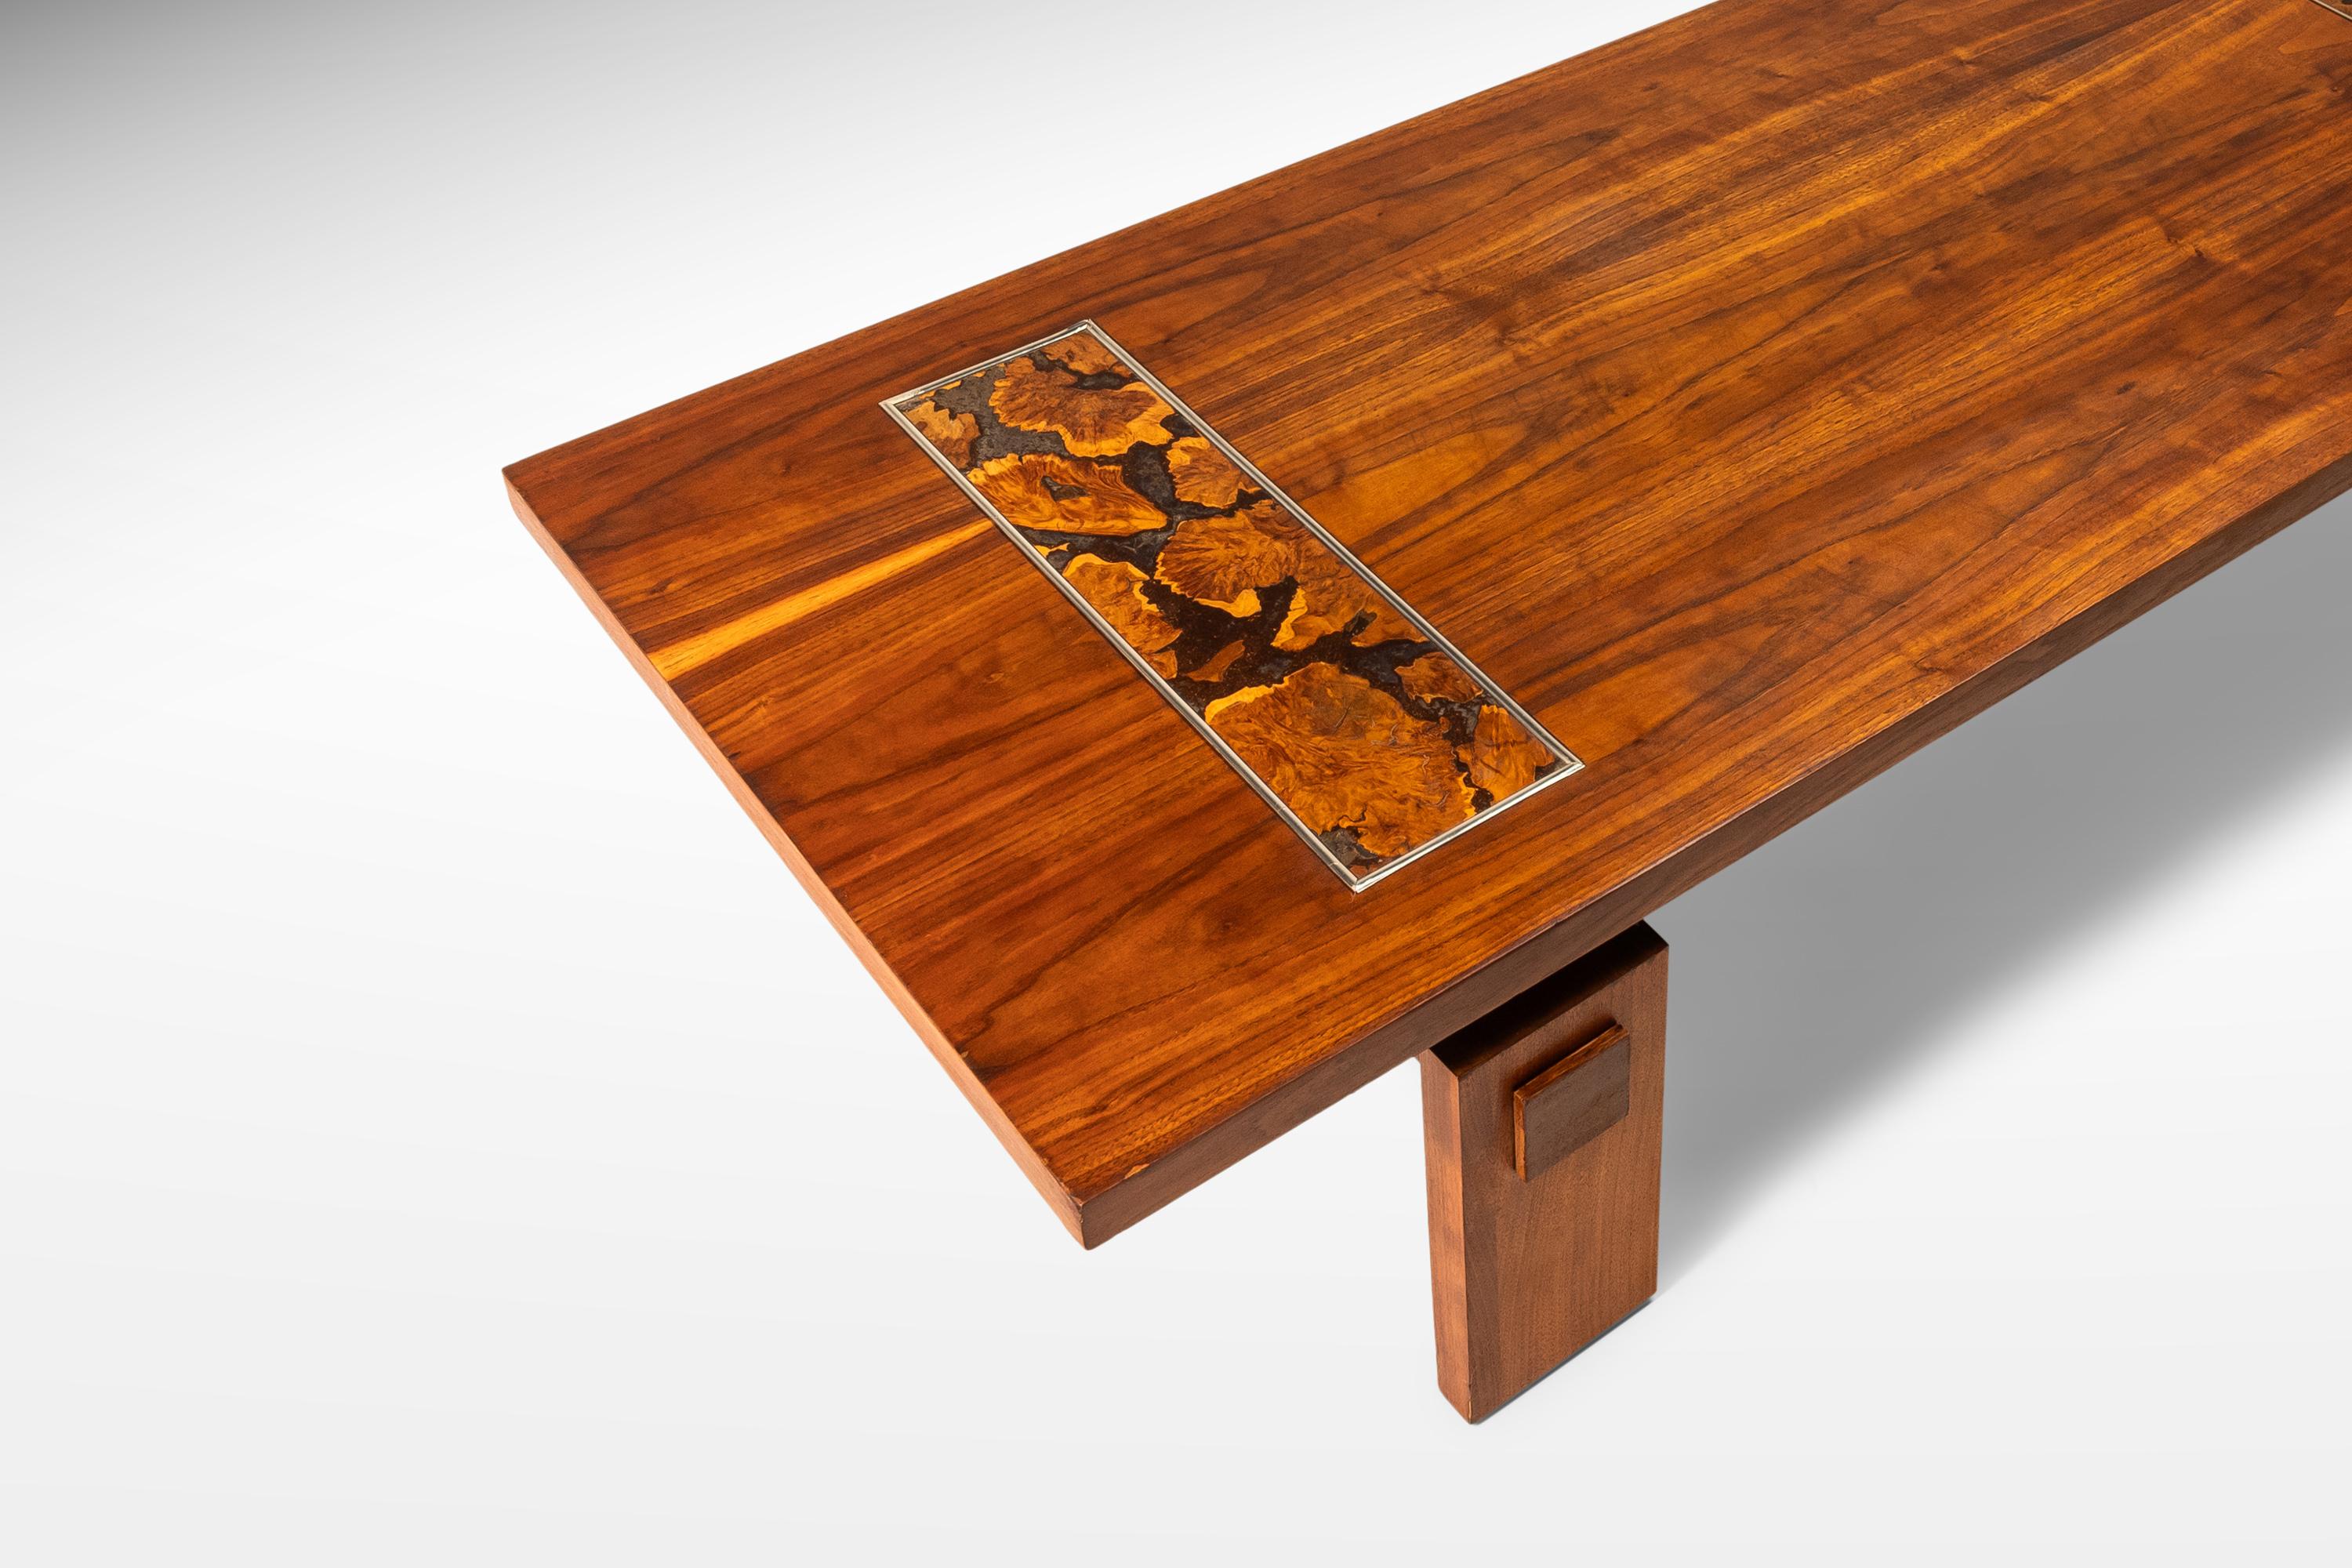 Modern Brutalist Coffee Table in Walnut with Burlwood Inlay by Lane, c. 1970's 4